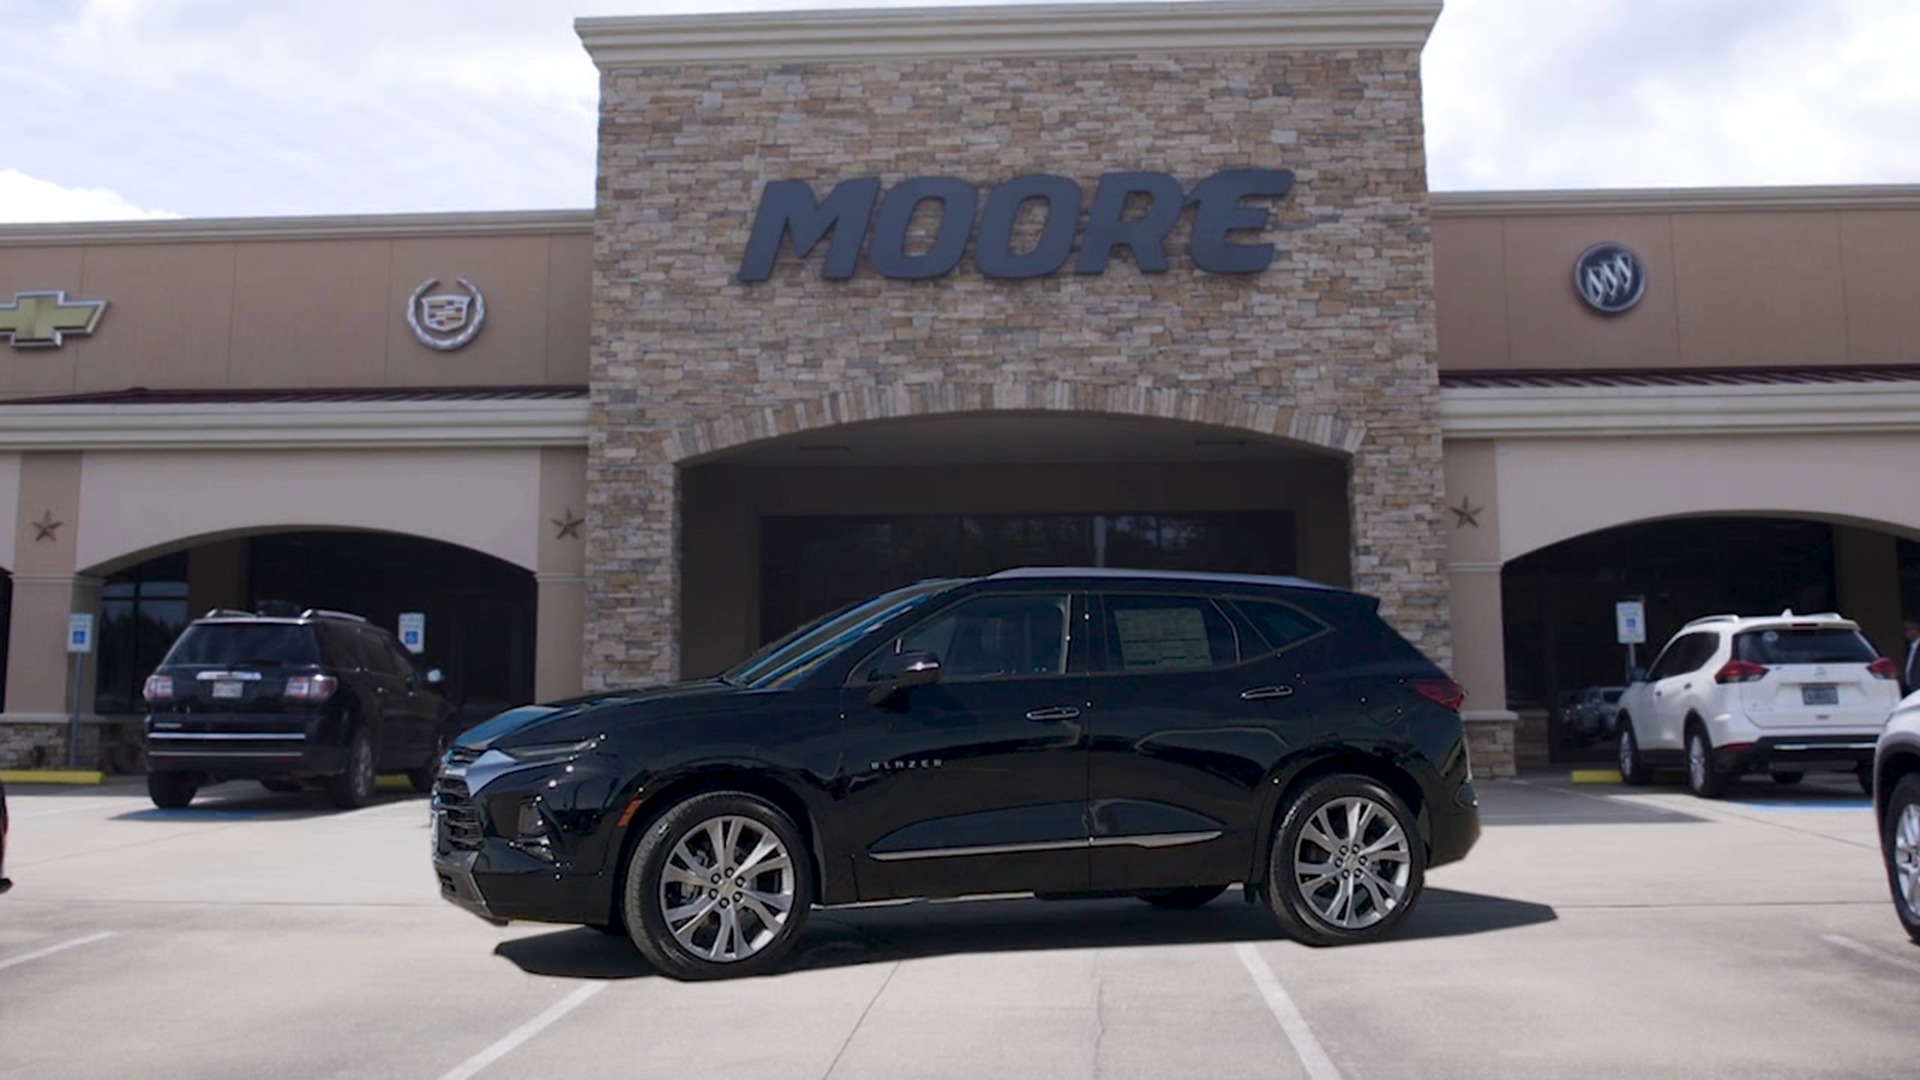 Check out the 2019 Chevy Blazer we're test driving today from Moore Auto in Silsbee. Call (409) 291-4539 or visit https://www.1MooreGM.com to get yours!